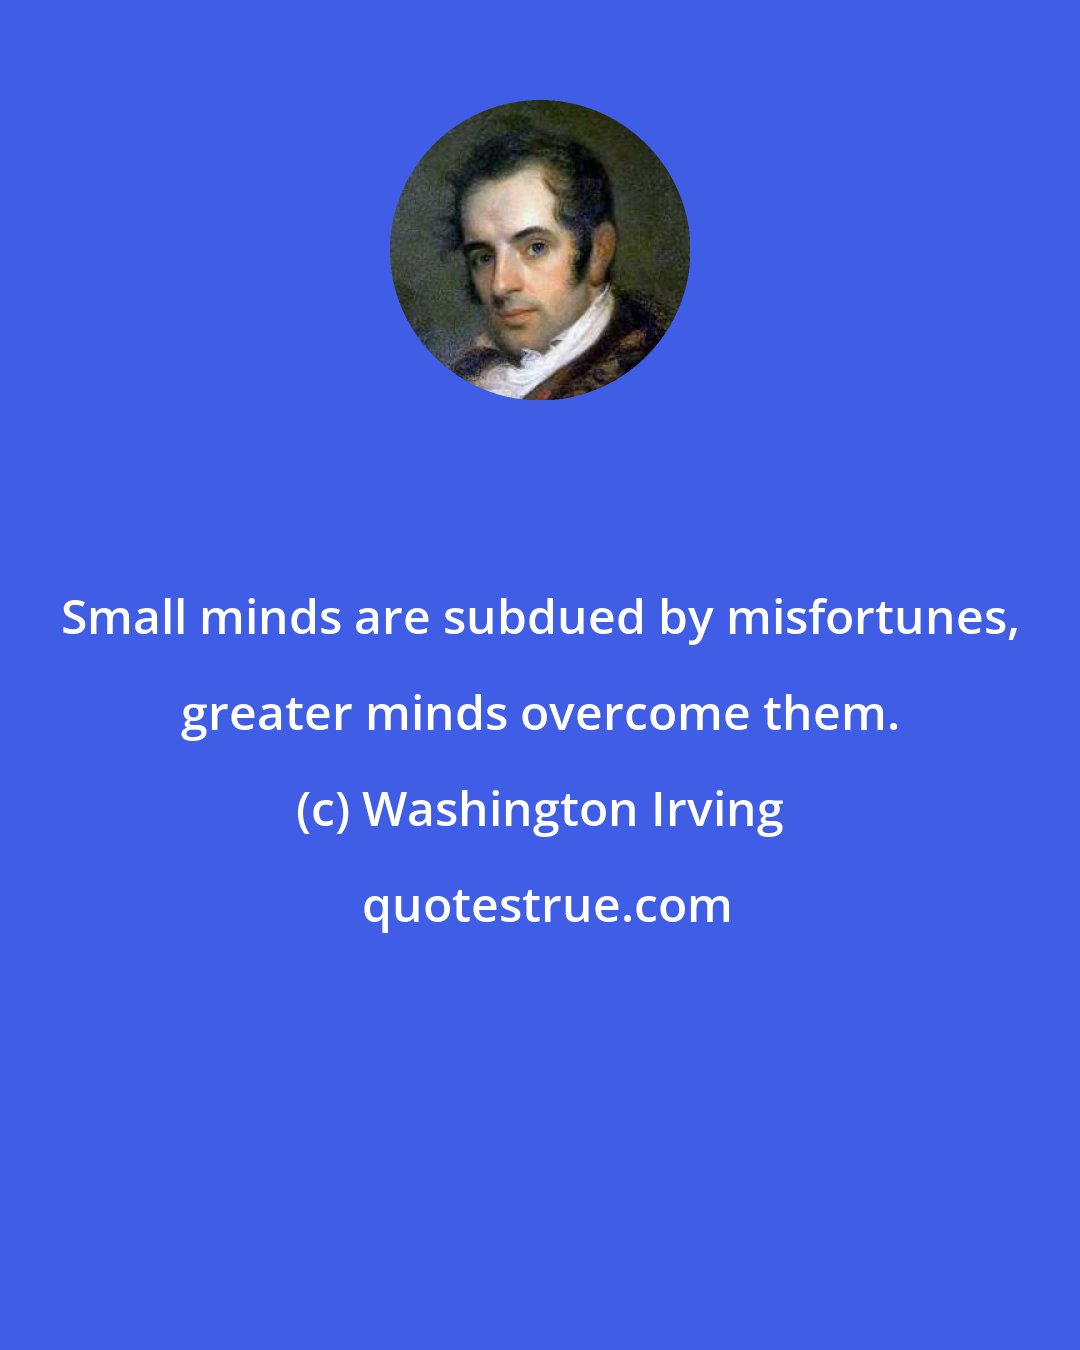 Washington Irving: Small minds are subdued by misfortunes, greater minds overcome them.